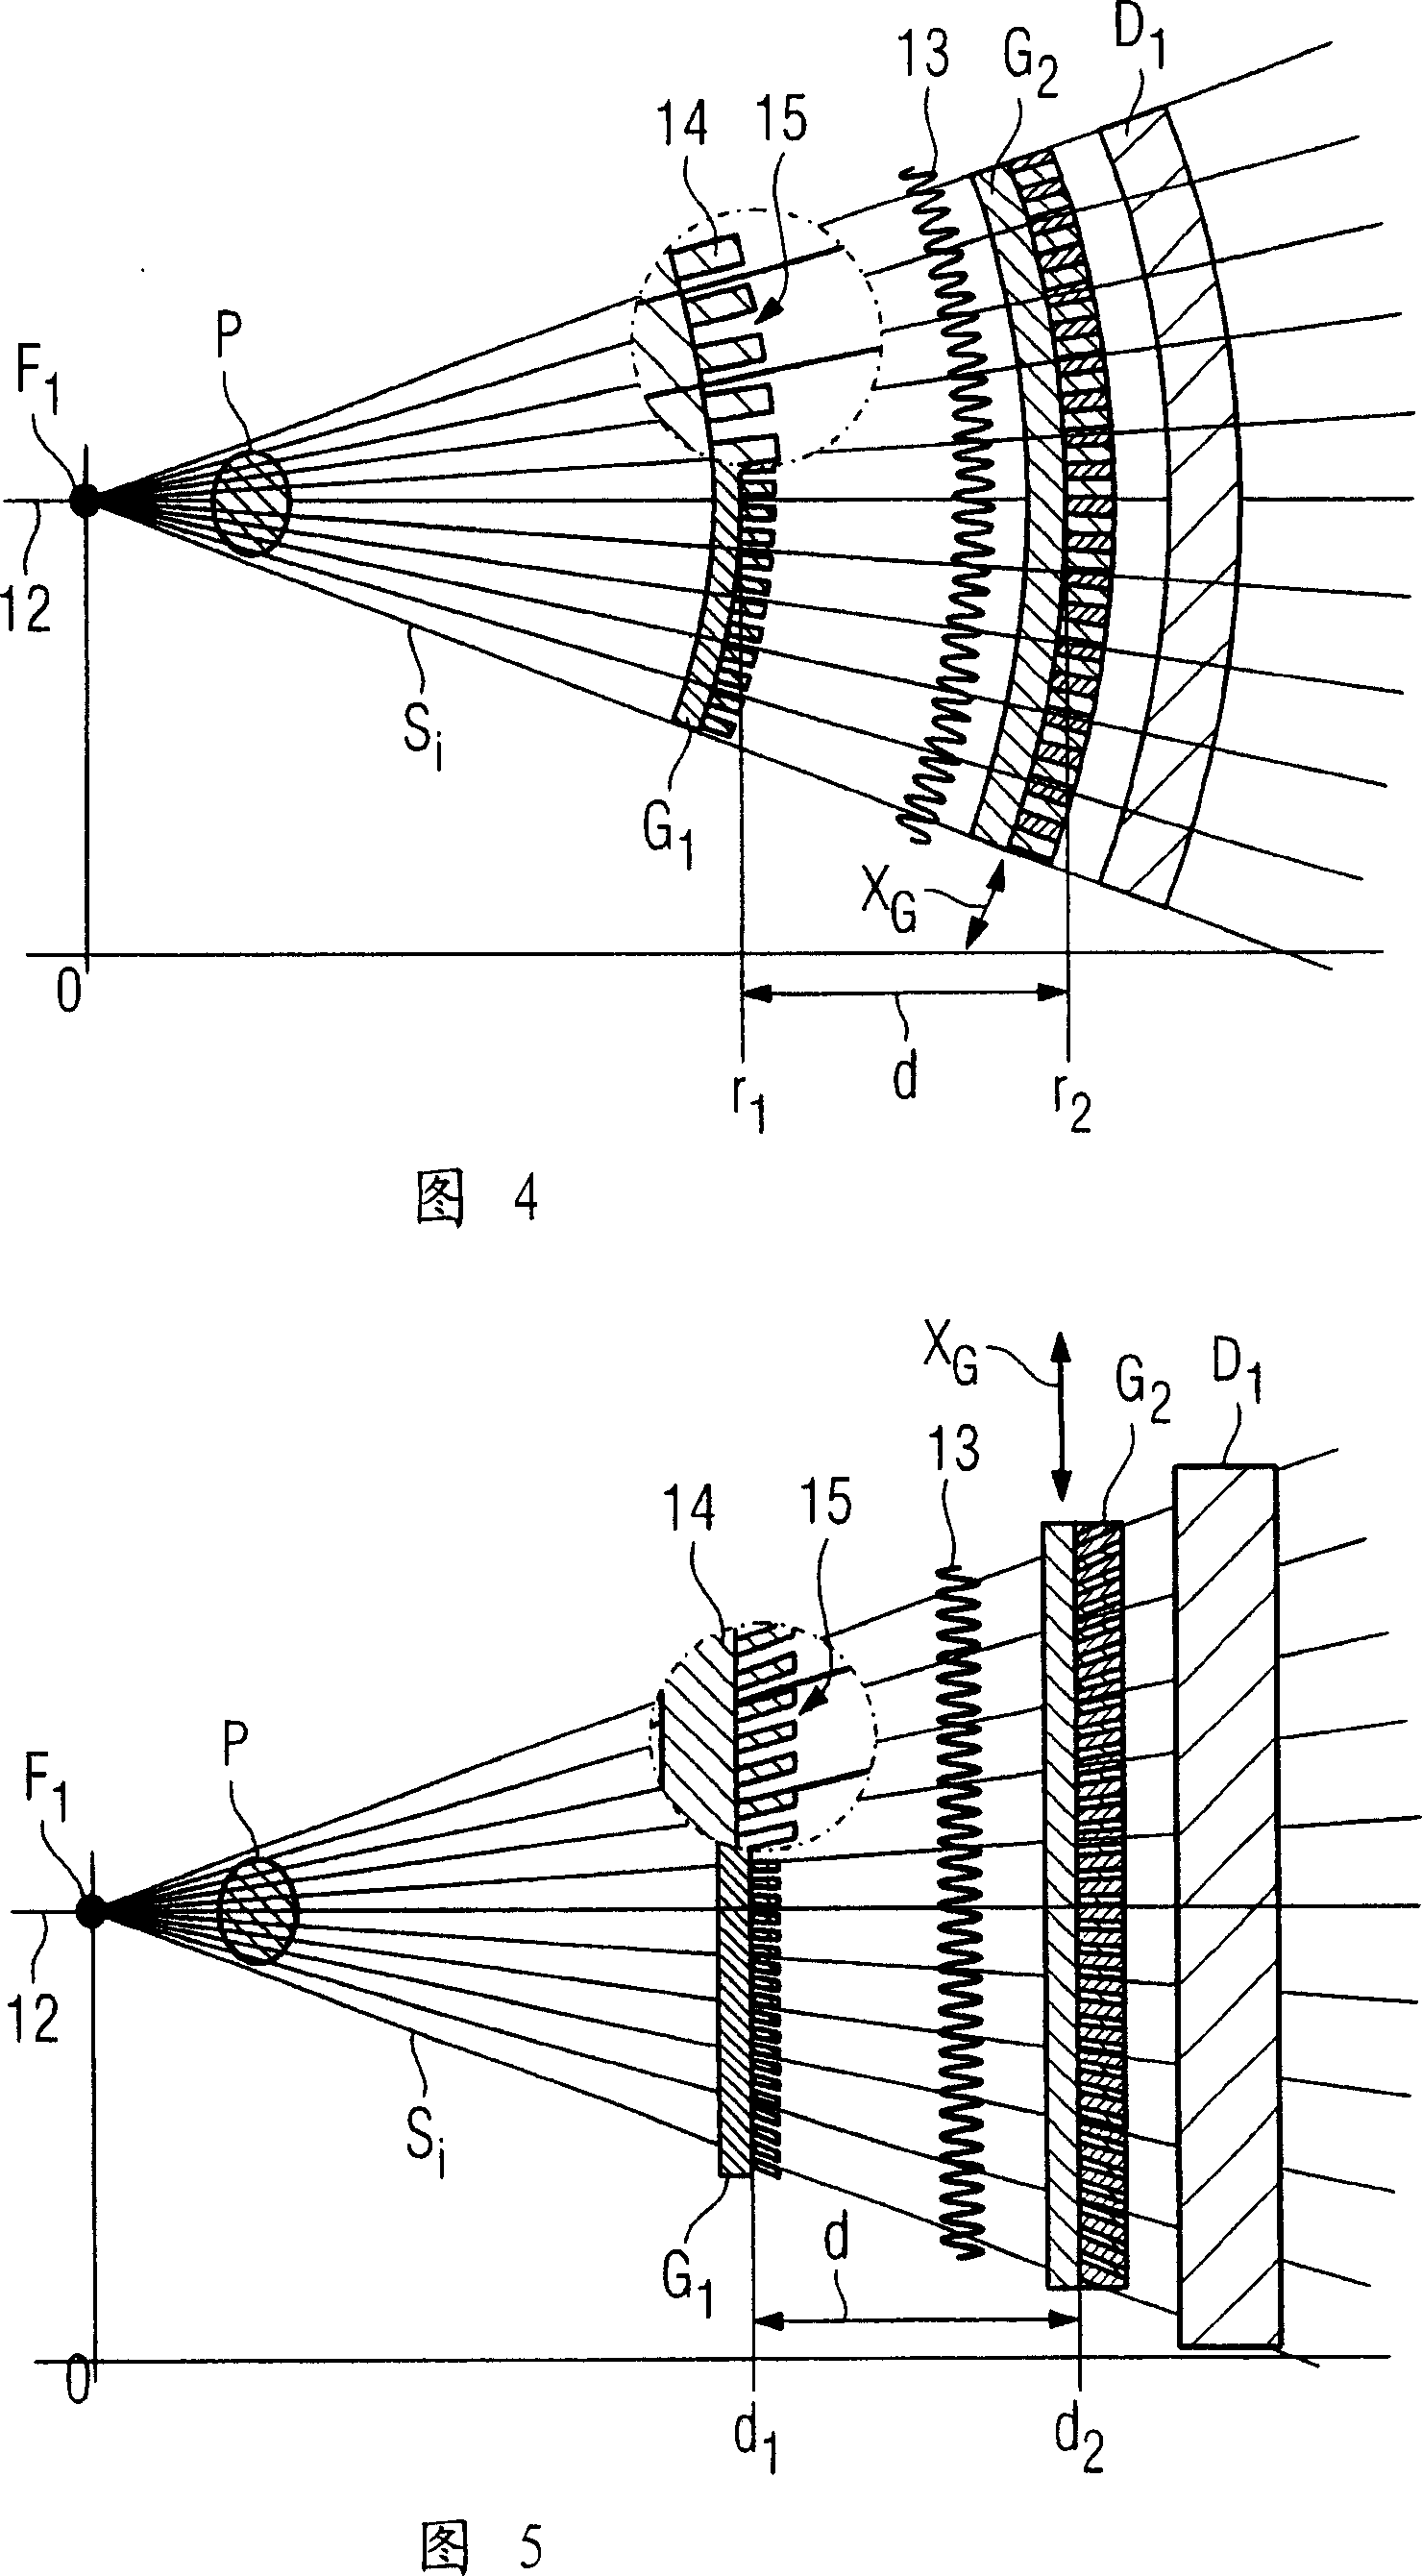 Focus detector arrangement for generating phase-contrast X-ray images and method for this